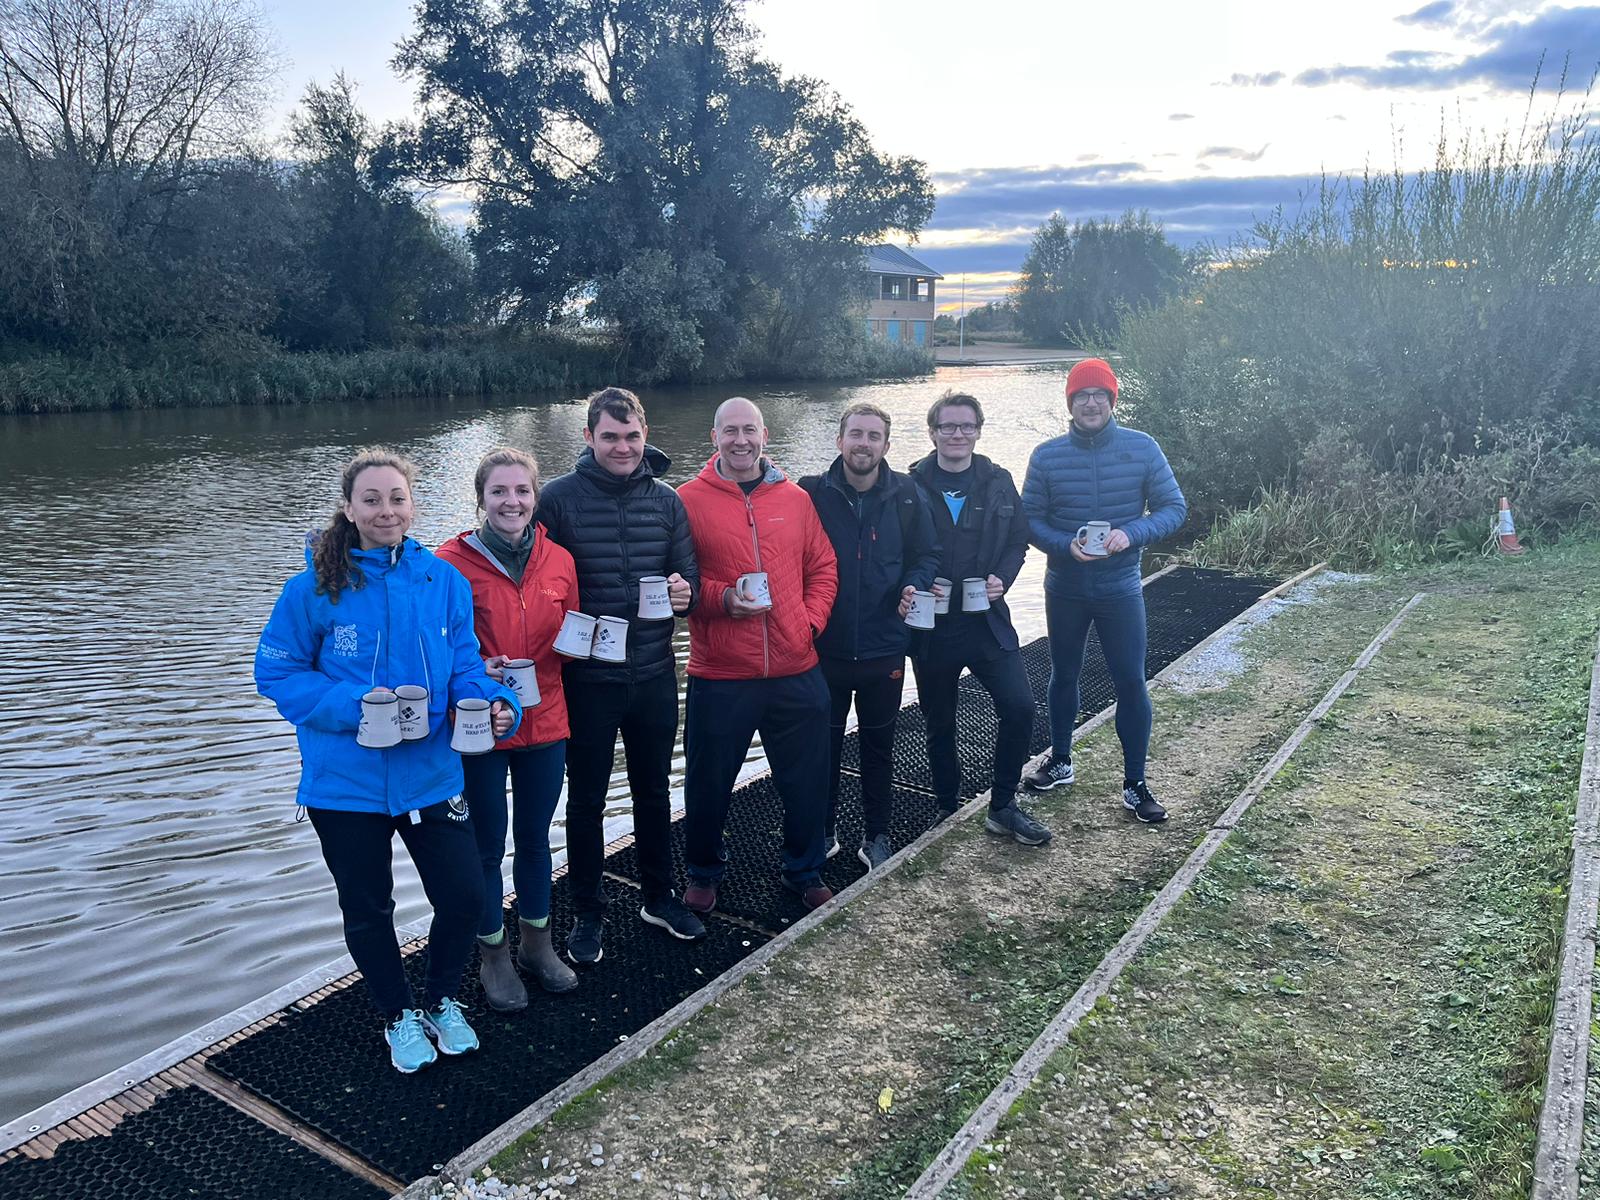 St Neots Rowing Club rowers stand in front of the river at Ely holding their winners pots